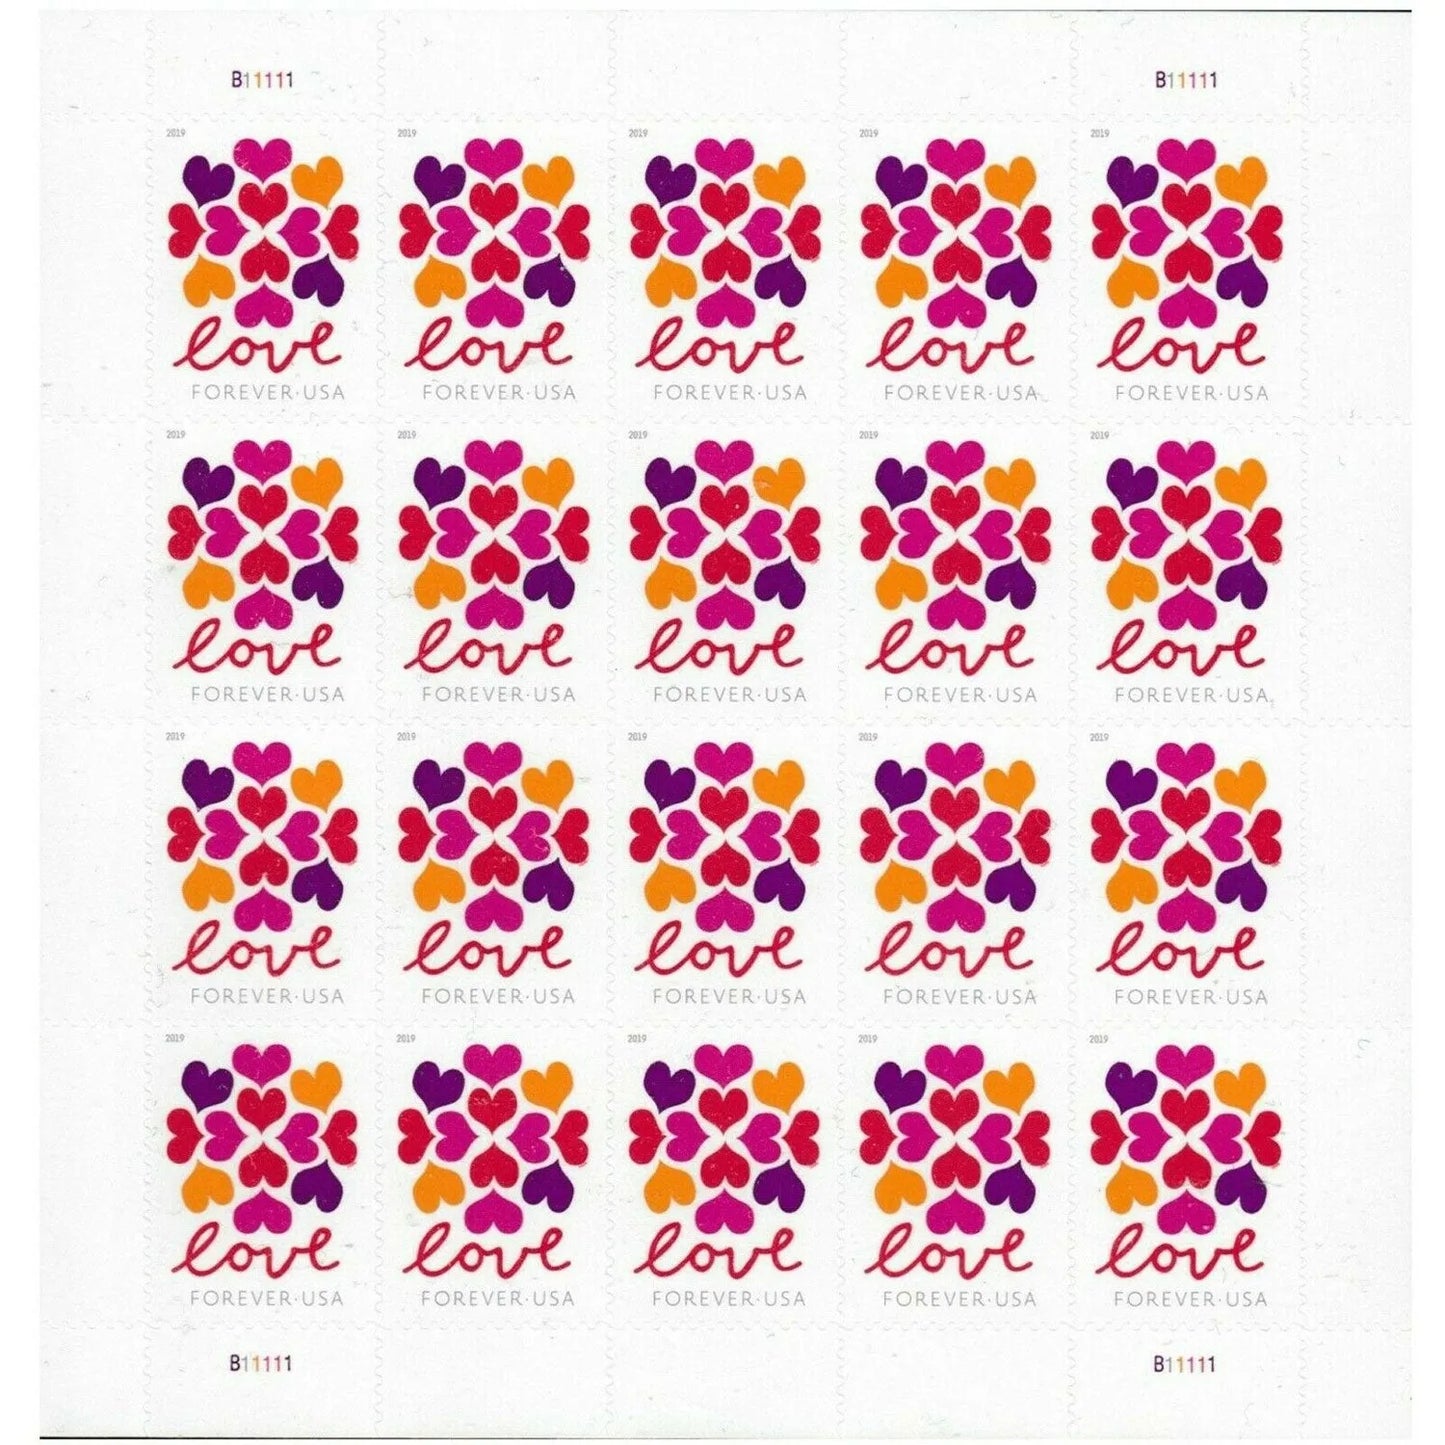 2019 Love Heart Blossom Forever First Class Postage Stamps